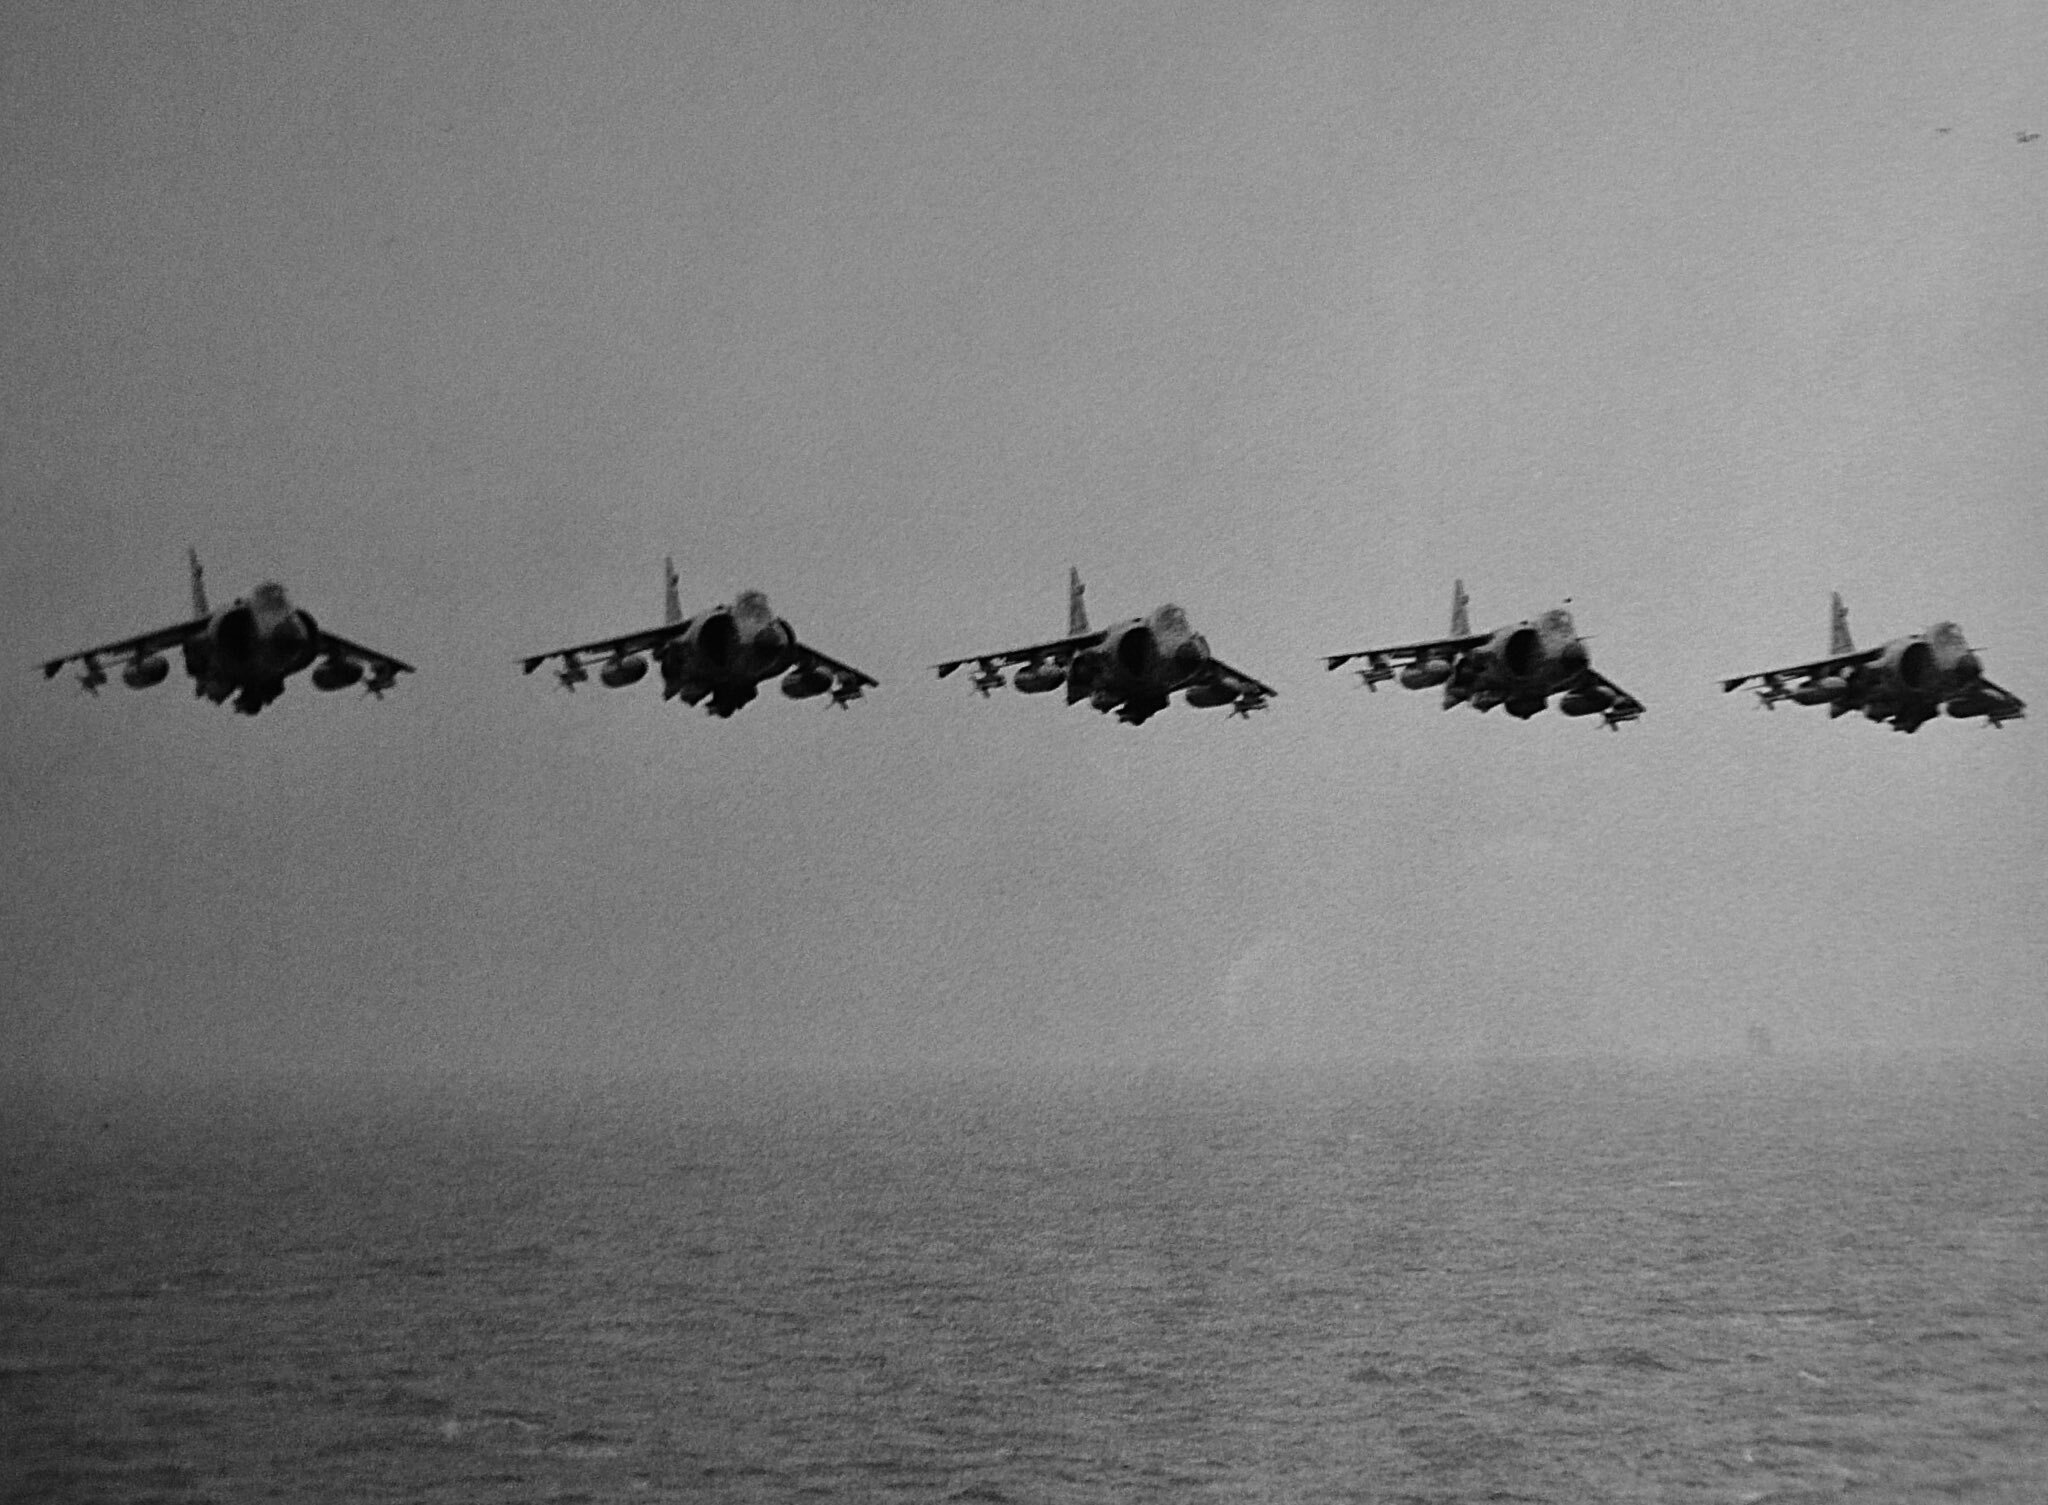 A flock of Sea Harriers. Image: Rowland White